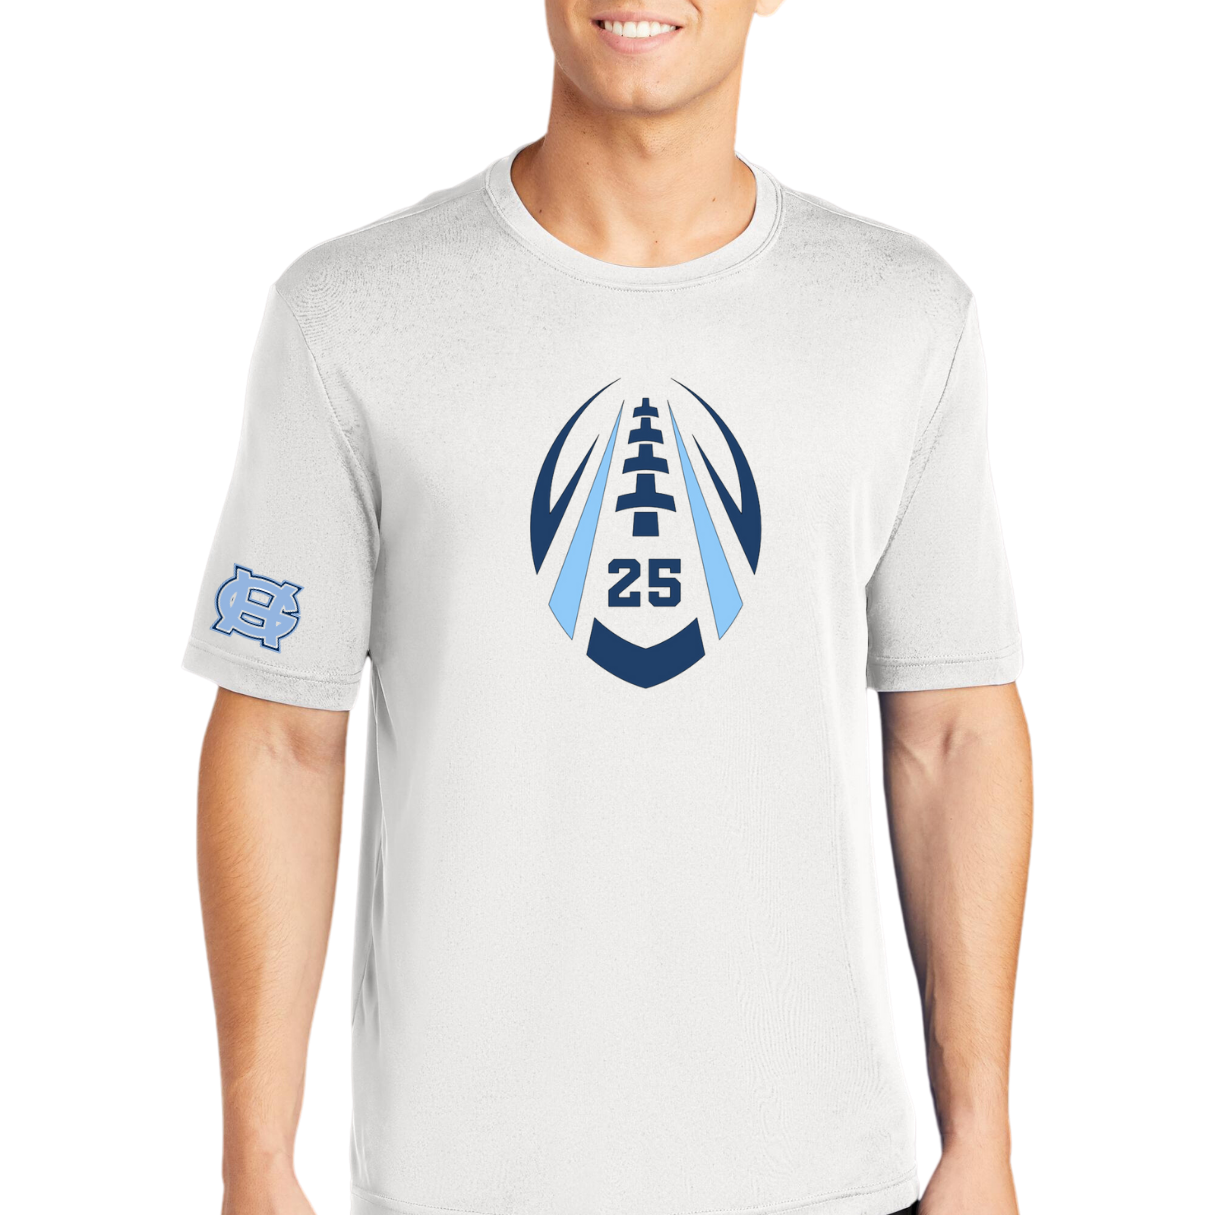 Tides Football Favorite Player Performance Tee - Adult and Youth